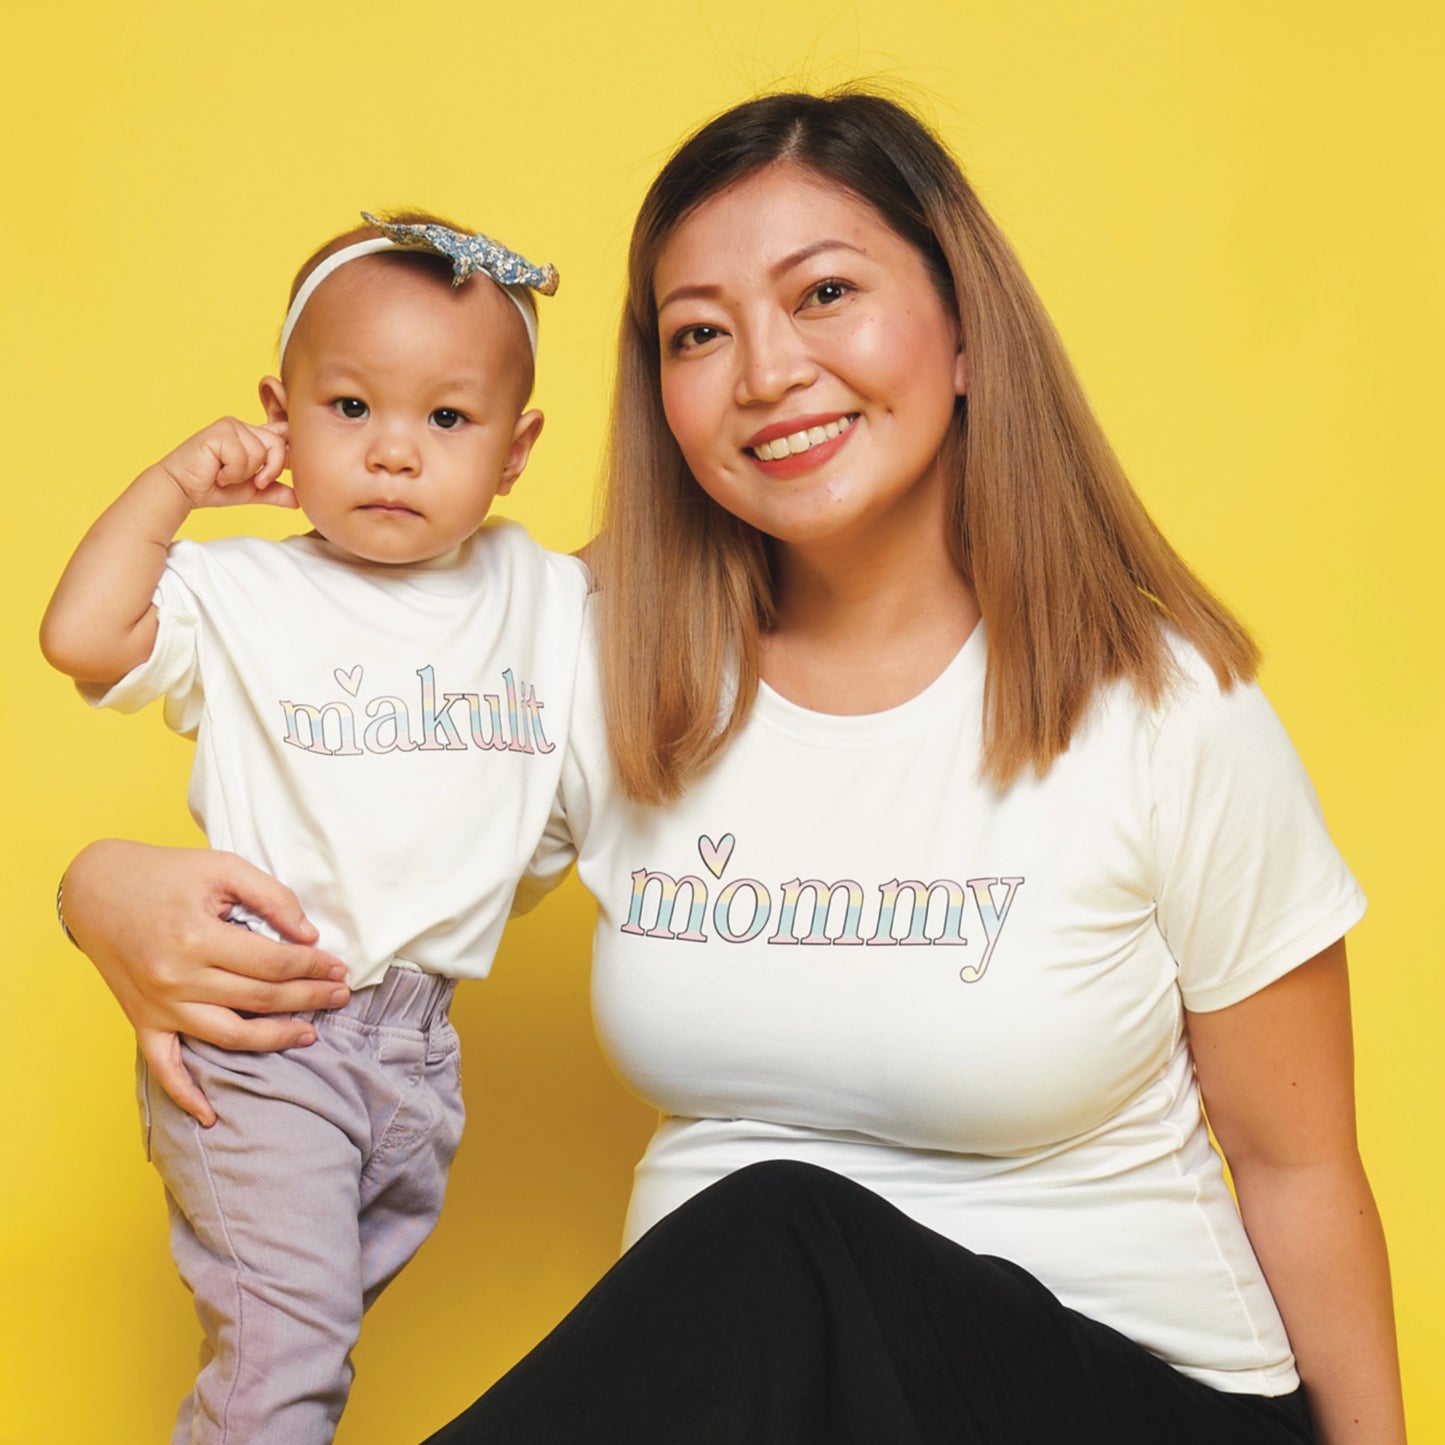 Mommy in Pastel Colors Mom Statement Shirt